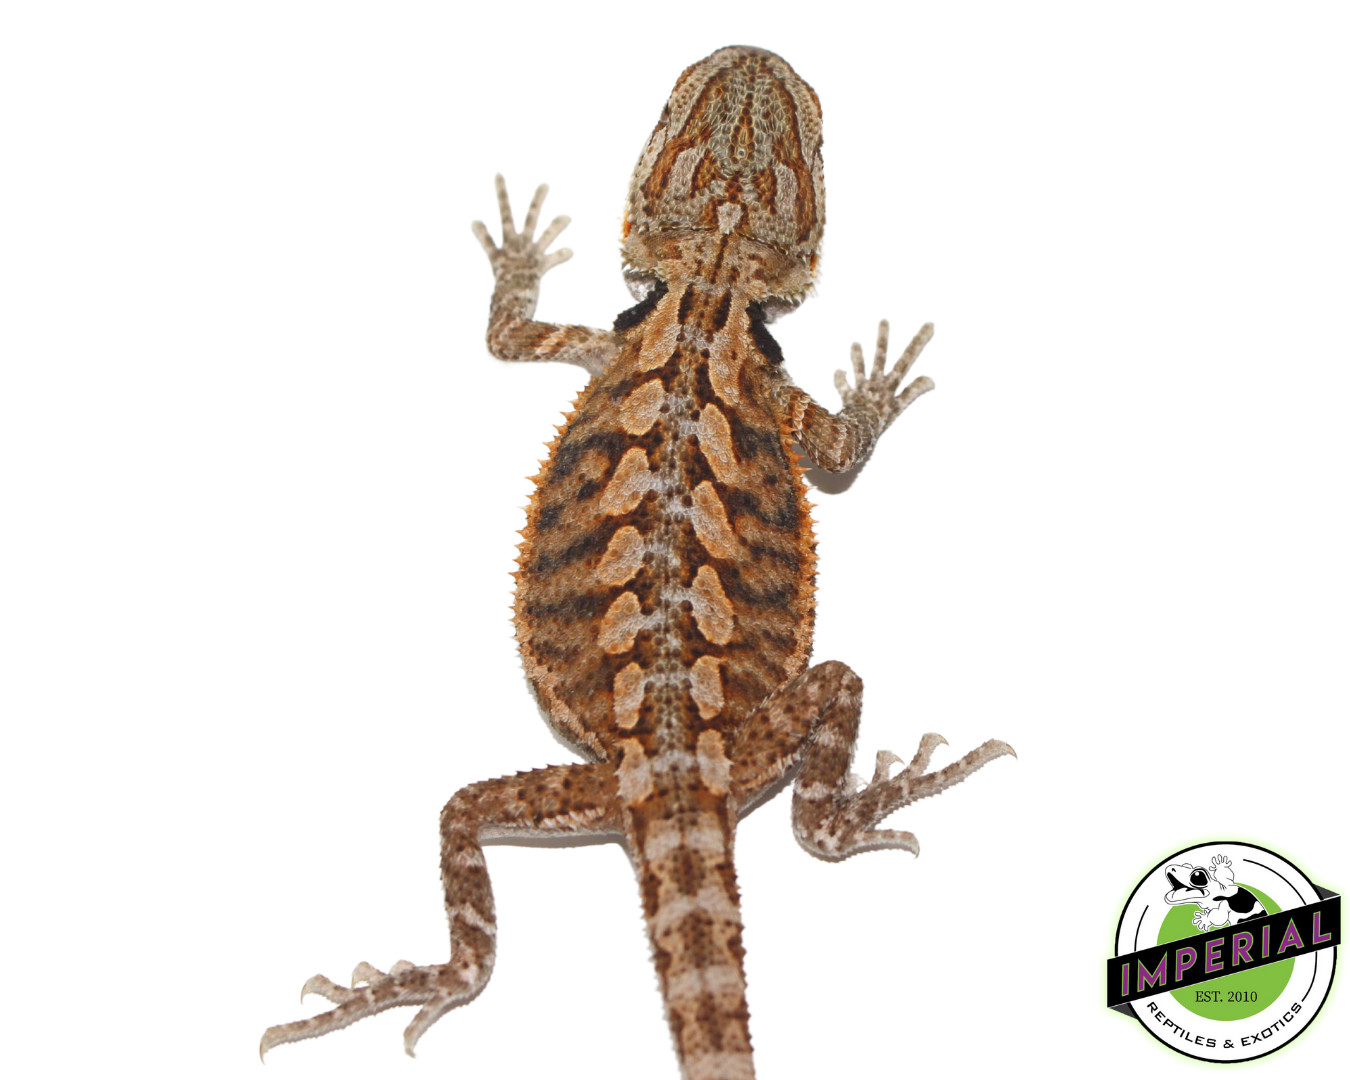 Red Central Bearded Dragon by Imperial Reptiles & Exotics, LLC